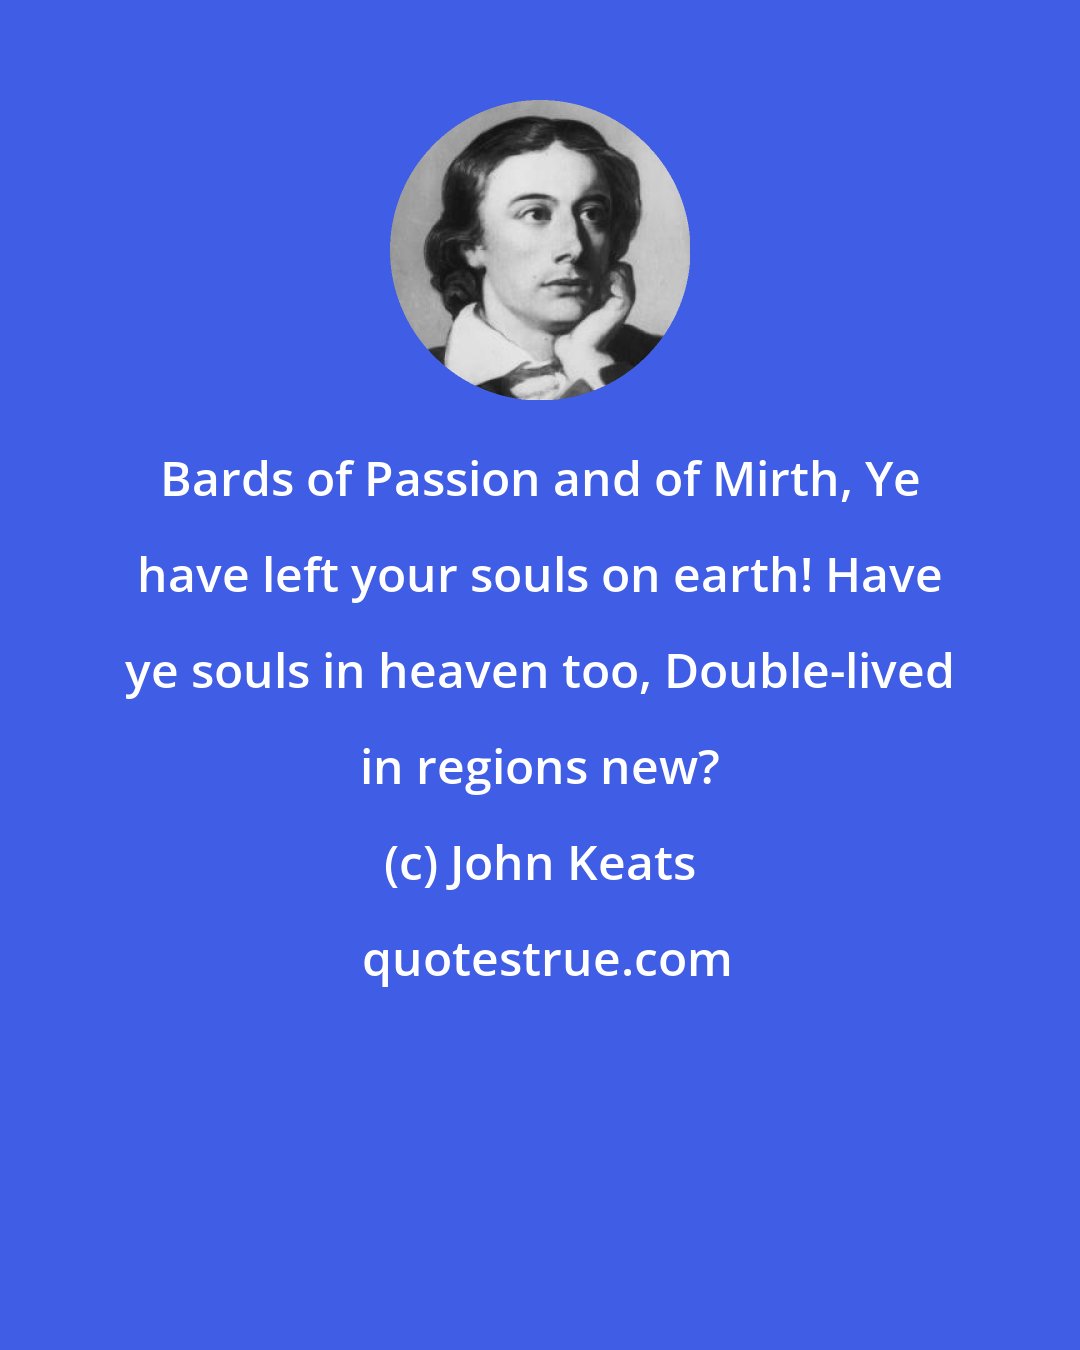 John Keats: Bards of Passion and of Mirth, Ye have left your souls on earth! Have ye souls in heaven too, Double-lived in regions new?